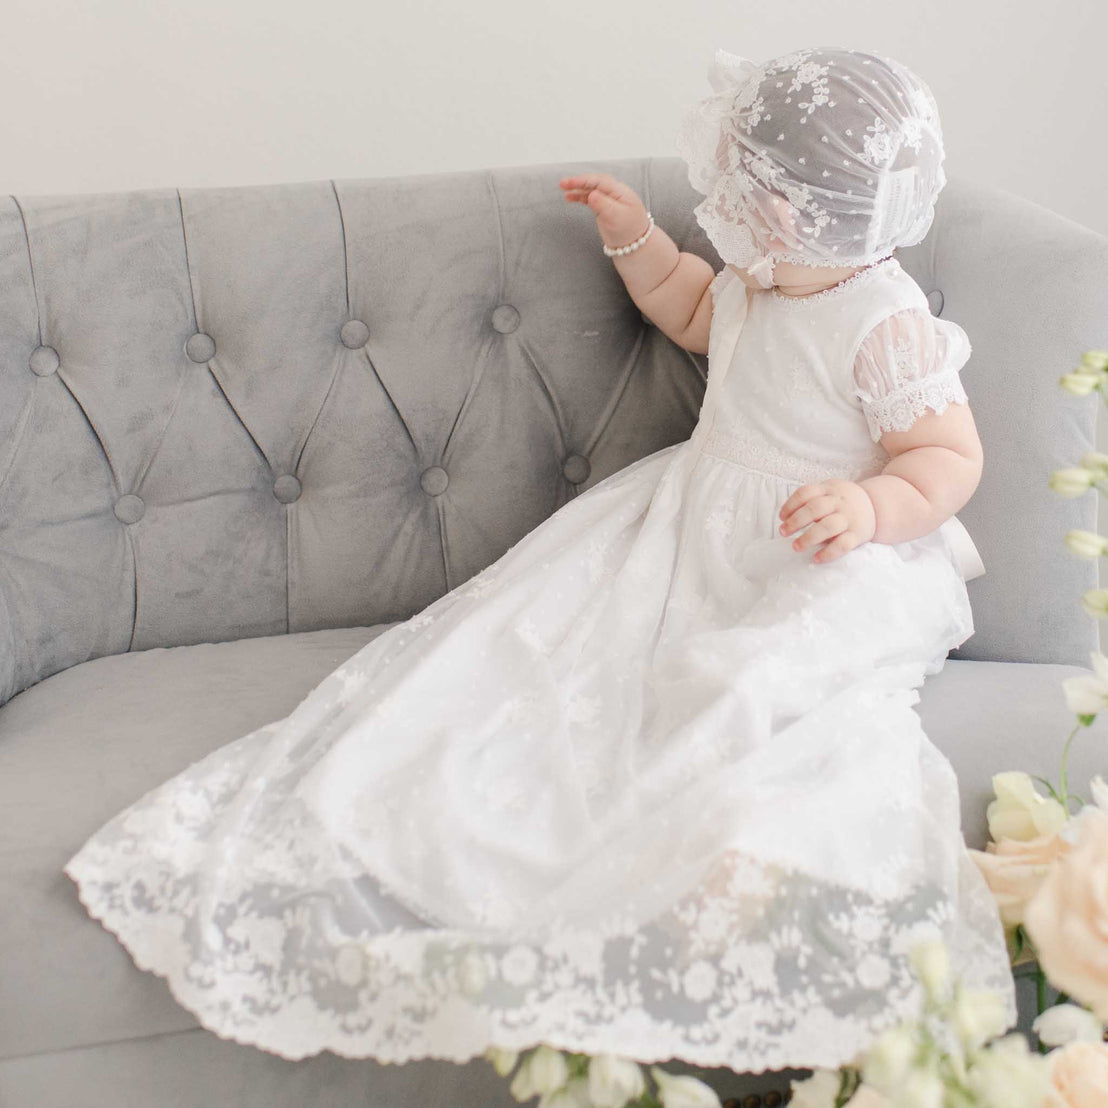 A girl dressed in a Melissa Christening Gown & Bonnet sits on a gray tufted sofa, turning her head to the side, surrounded by soft pink flowers.